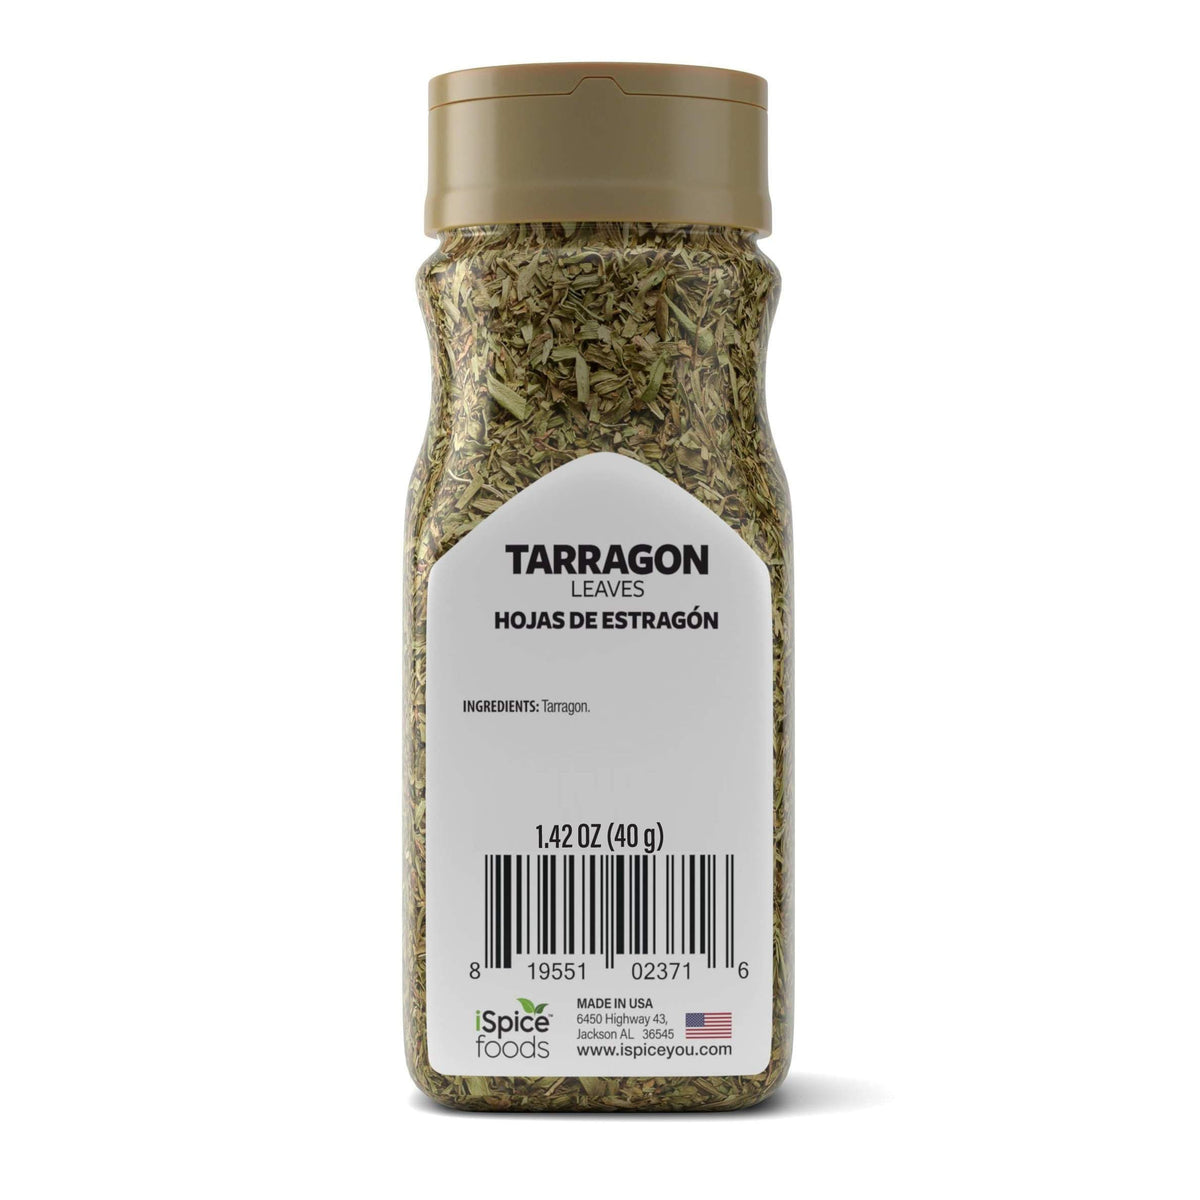 Cooking with Tarragon Leaves - A Guide for Beginners